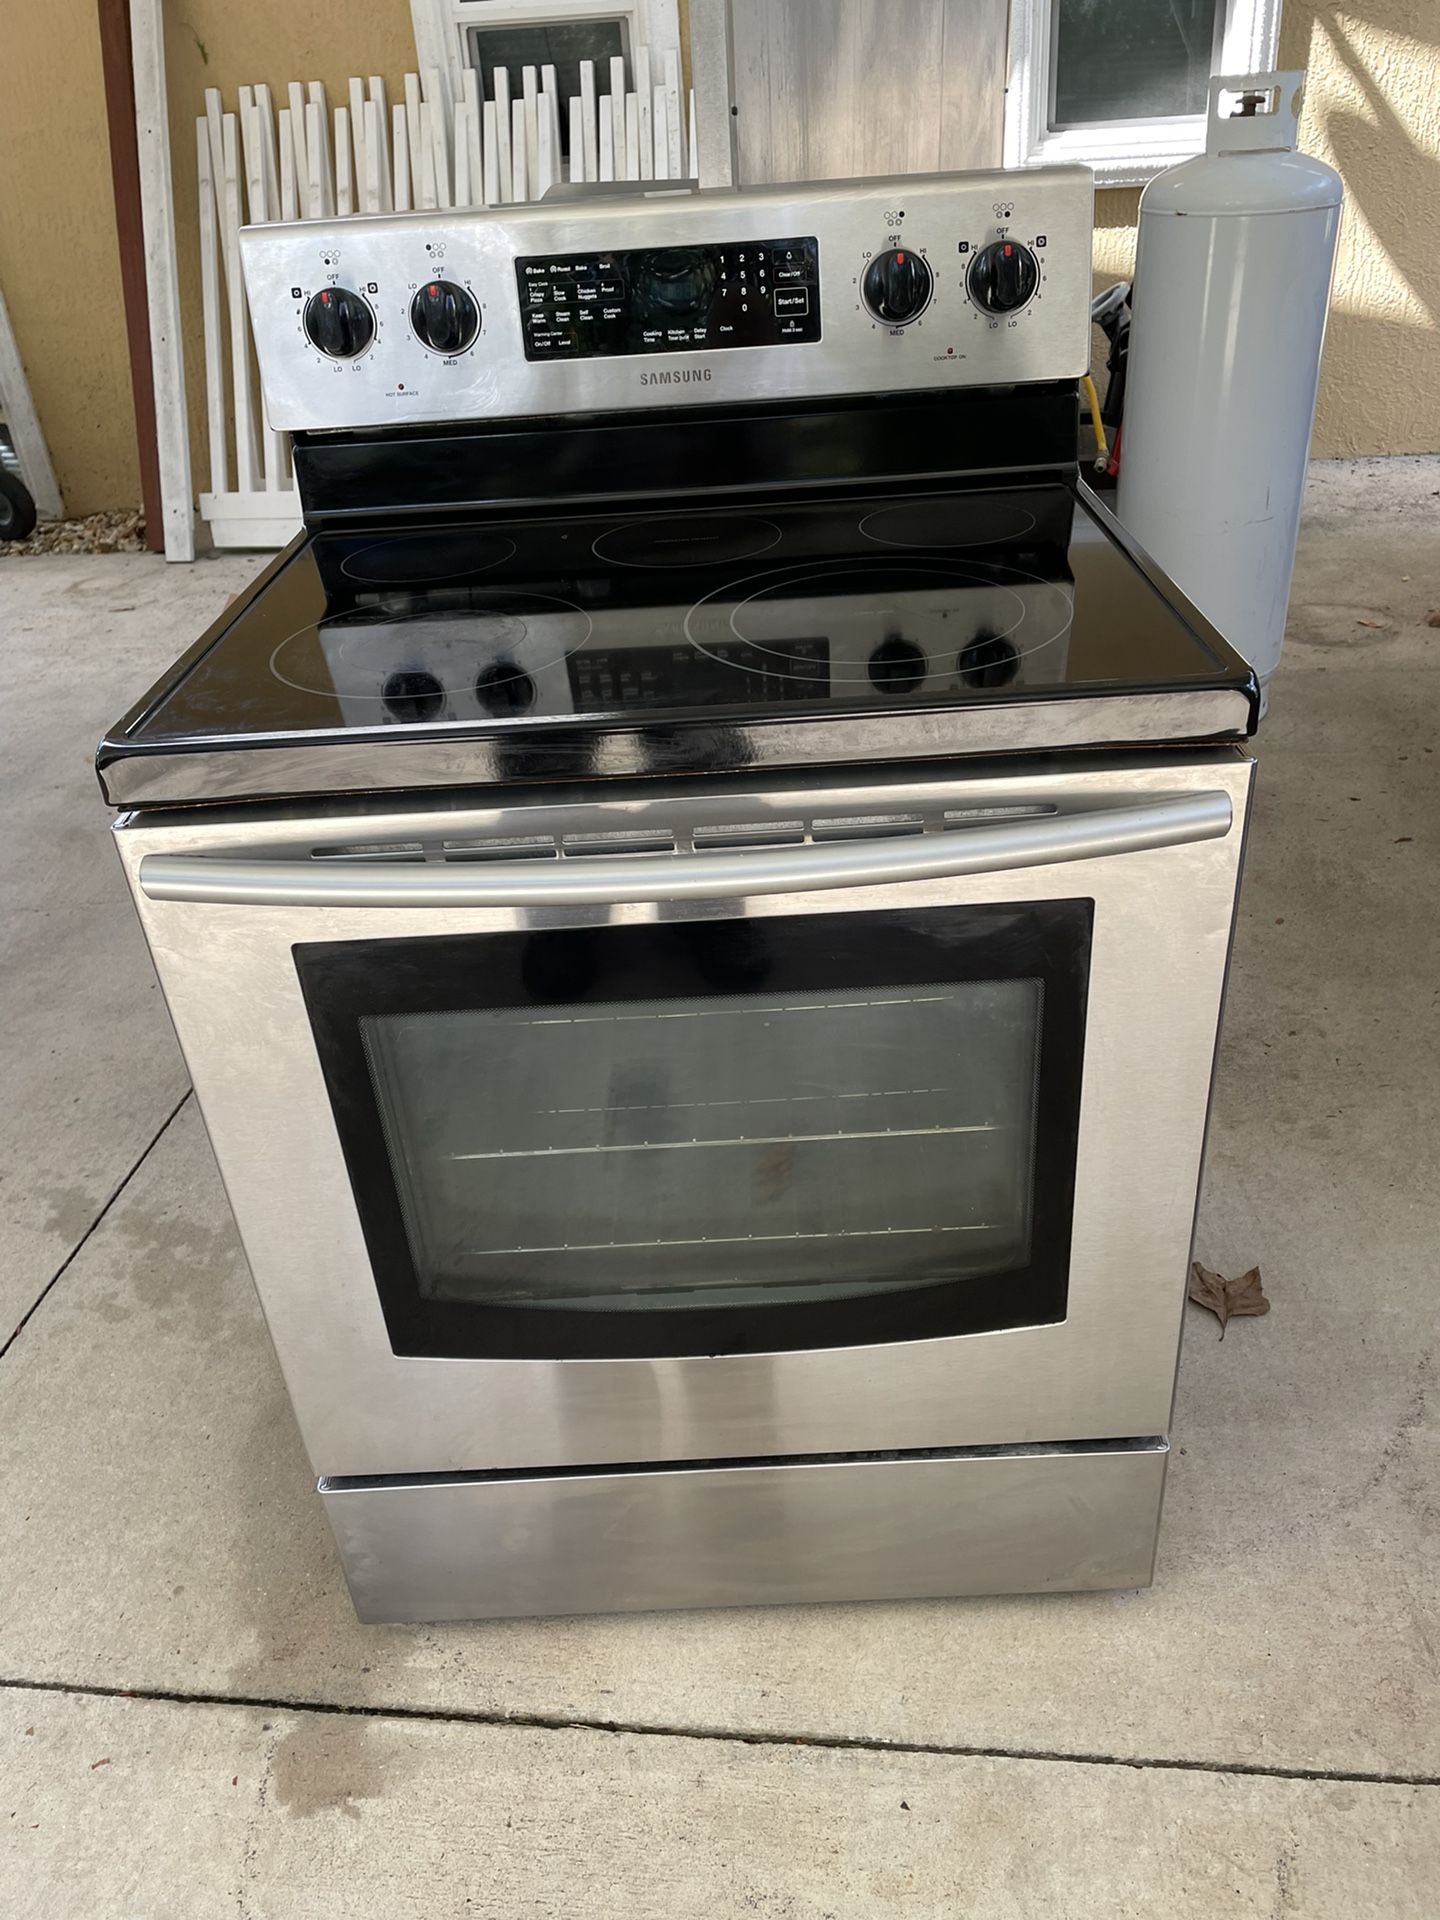 Samsung conventional stove 